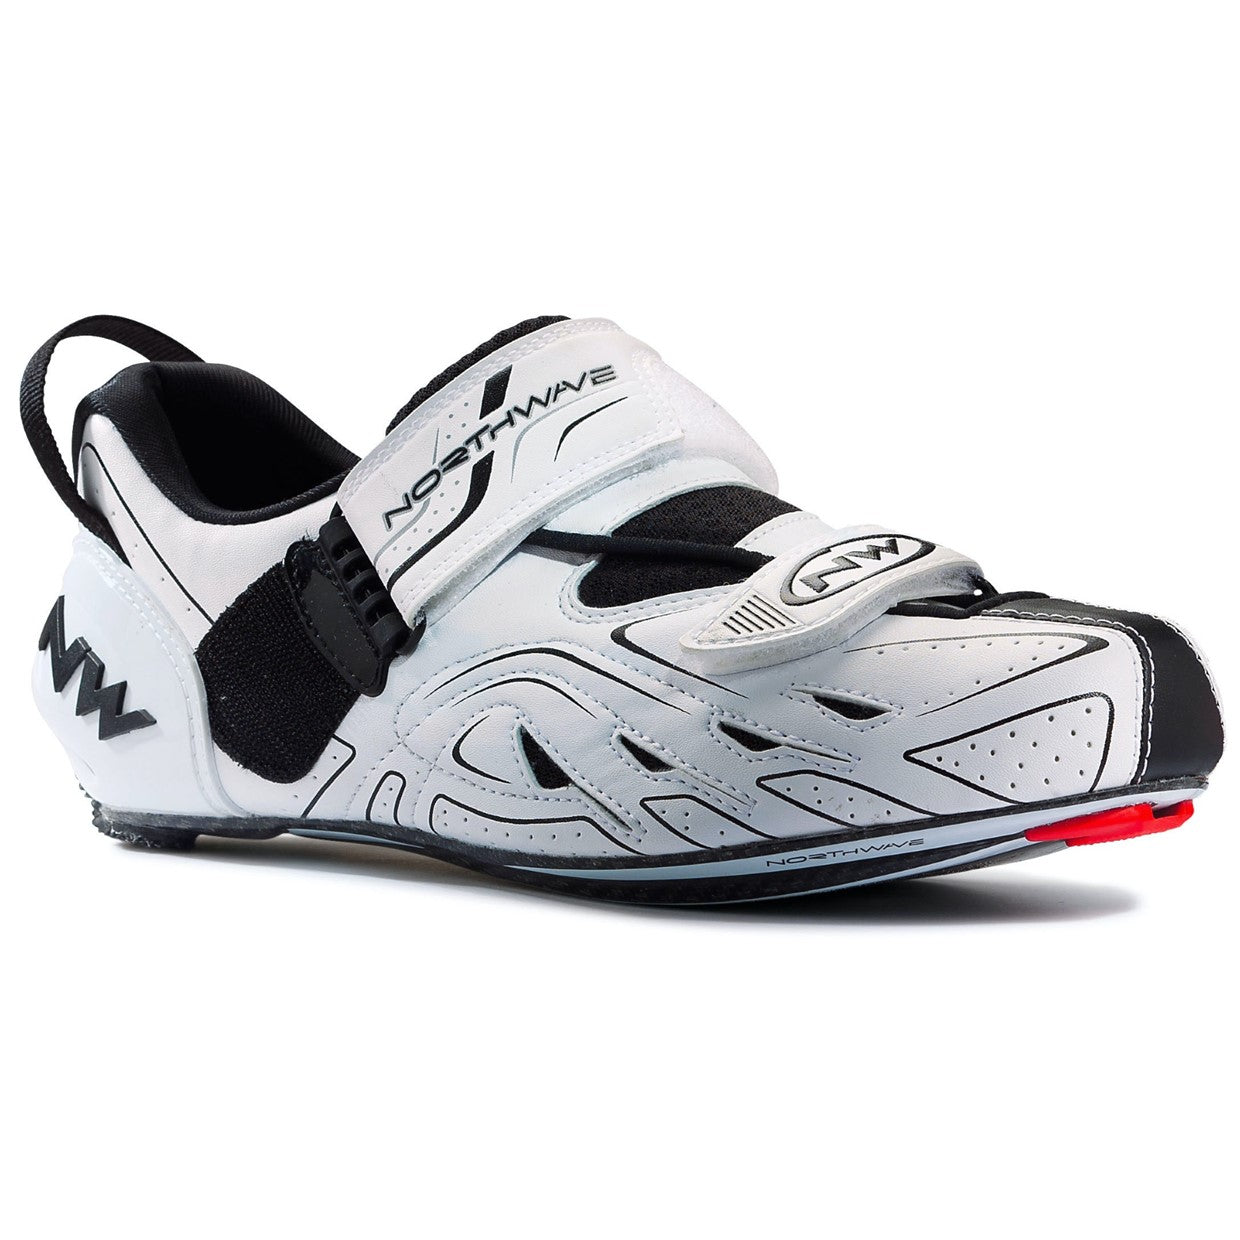 Northwave Tribute Triathalon Shoe, 2021 - Cycle Closet